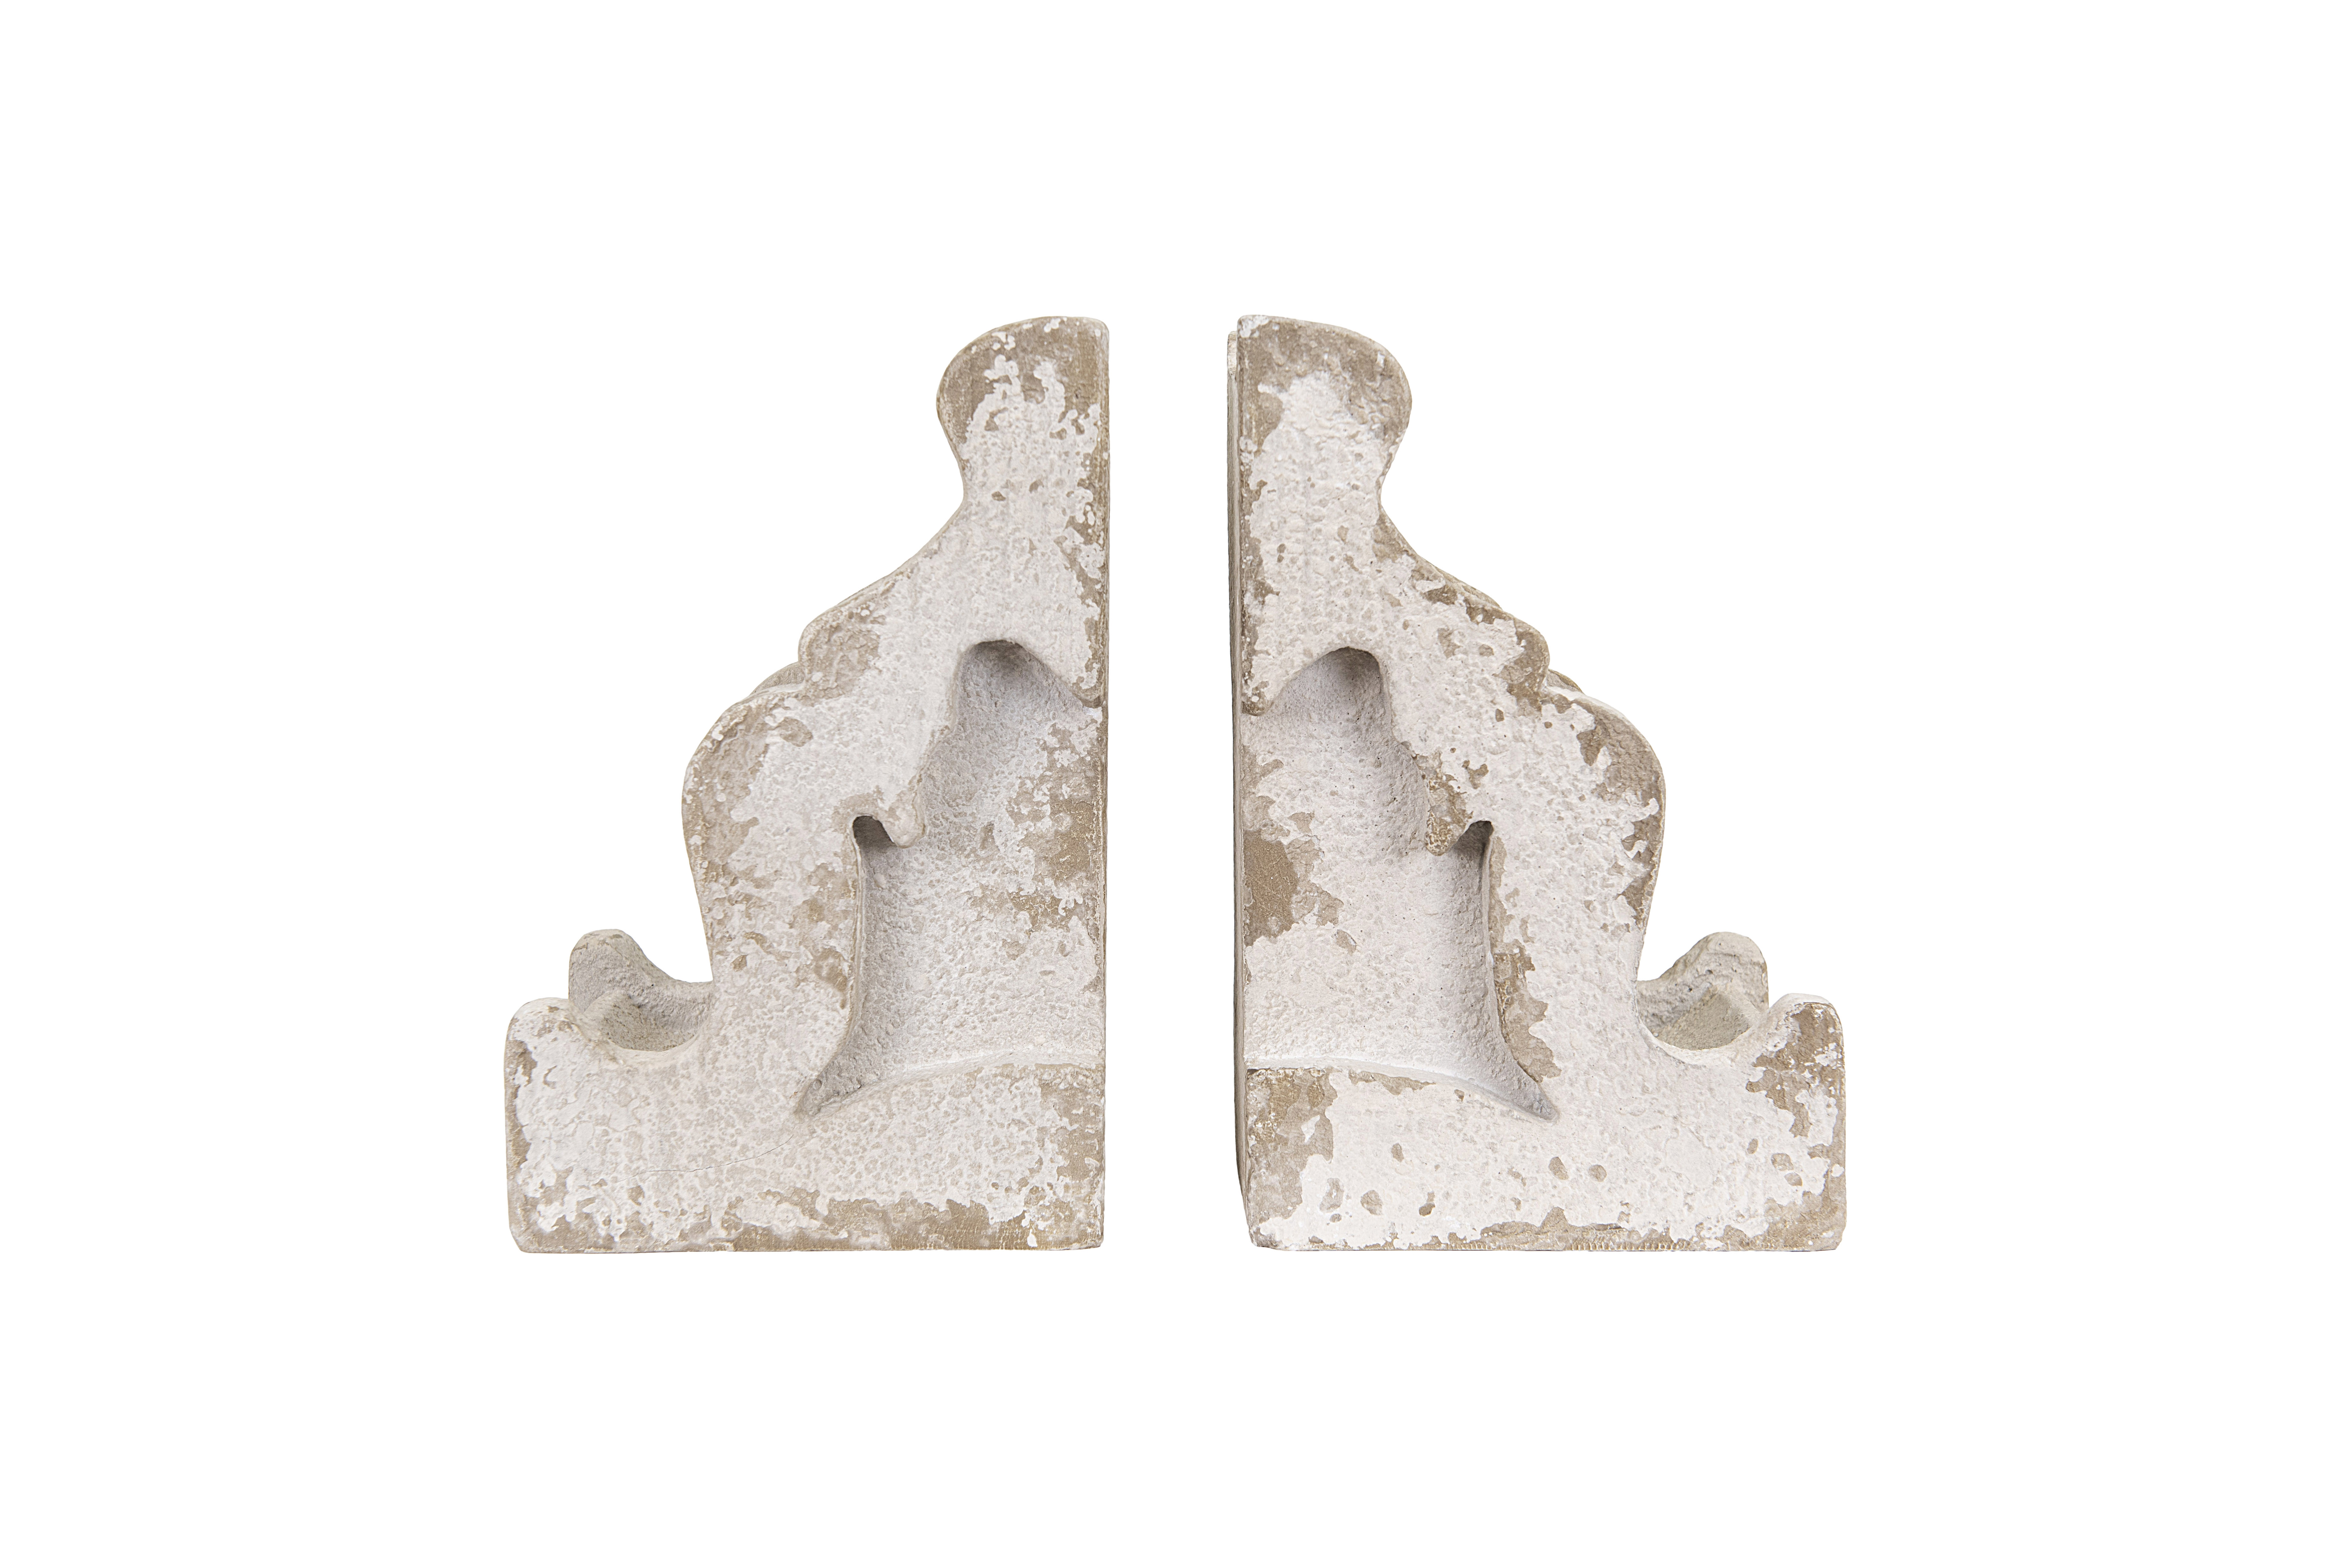 Distressed White Corbel Shaped Bookends (Set of 2 Pieces) - Nomad Home